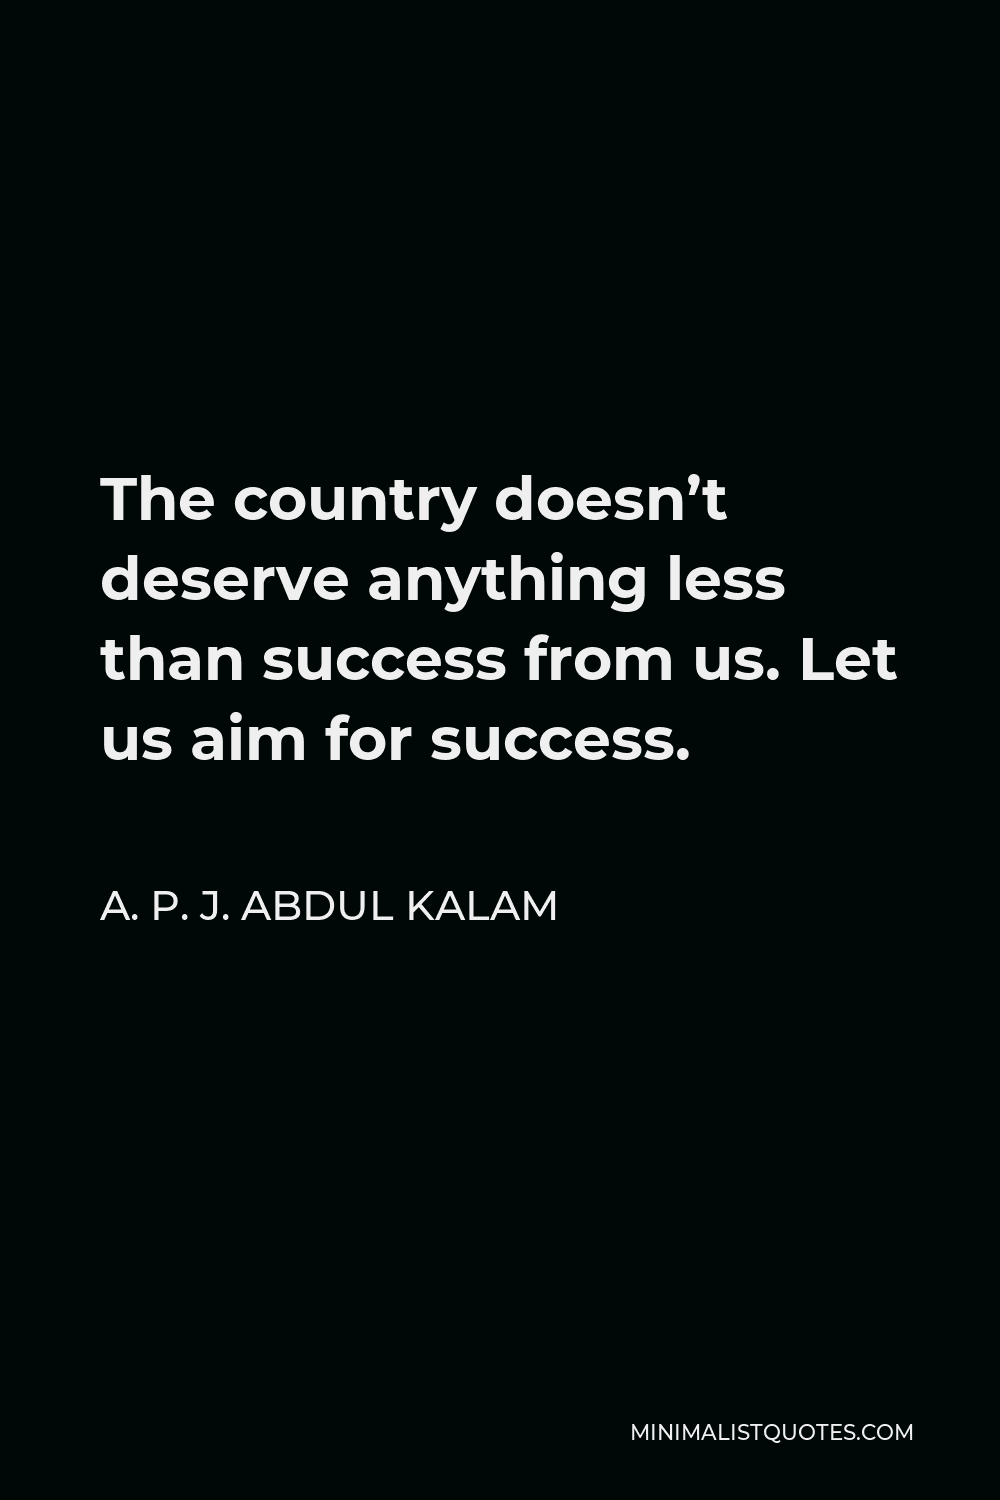 A. P. J. Abdul Kalam Quote - The country doesn’t deserve anything less than success from us. Let us aim for success.